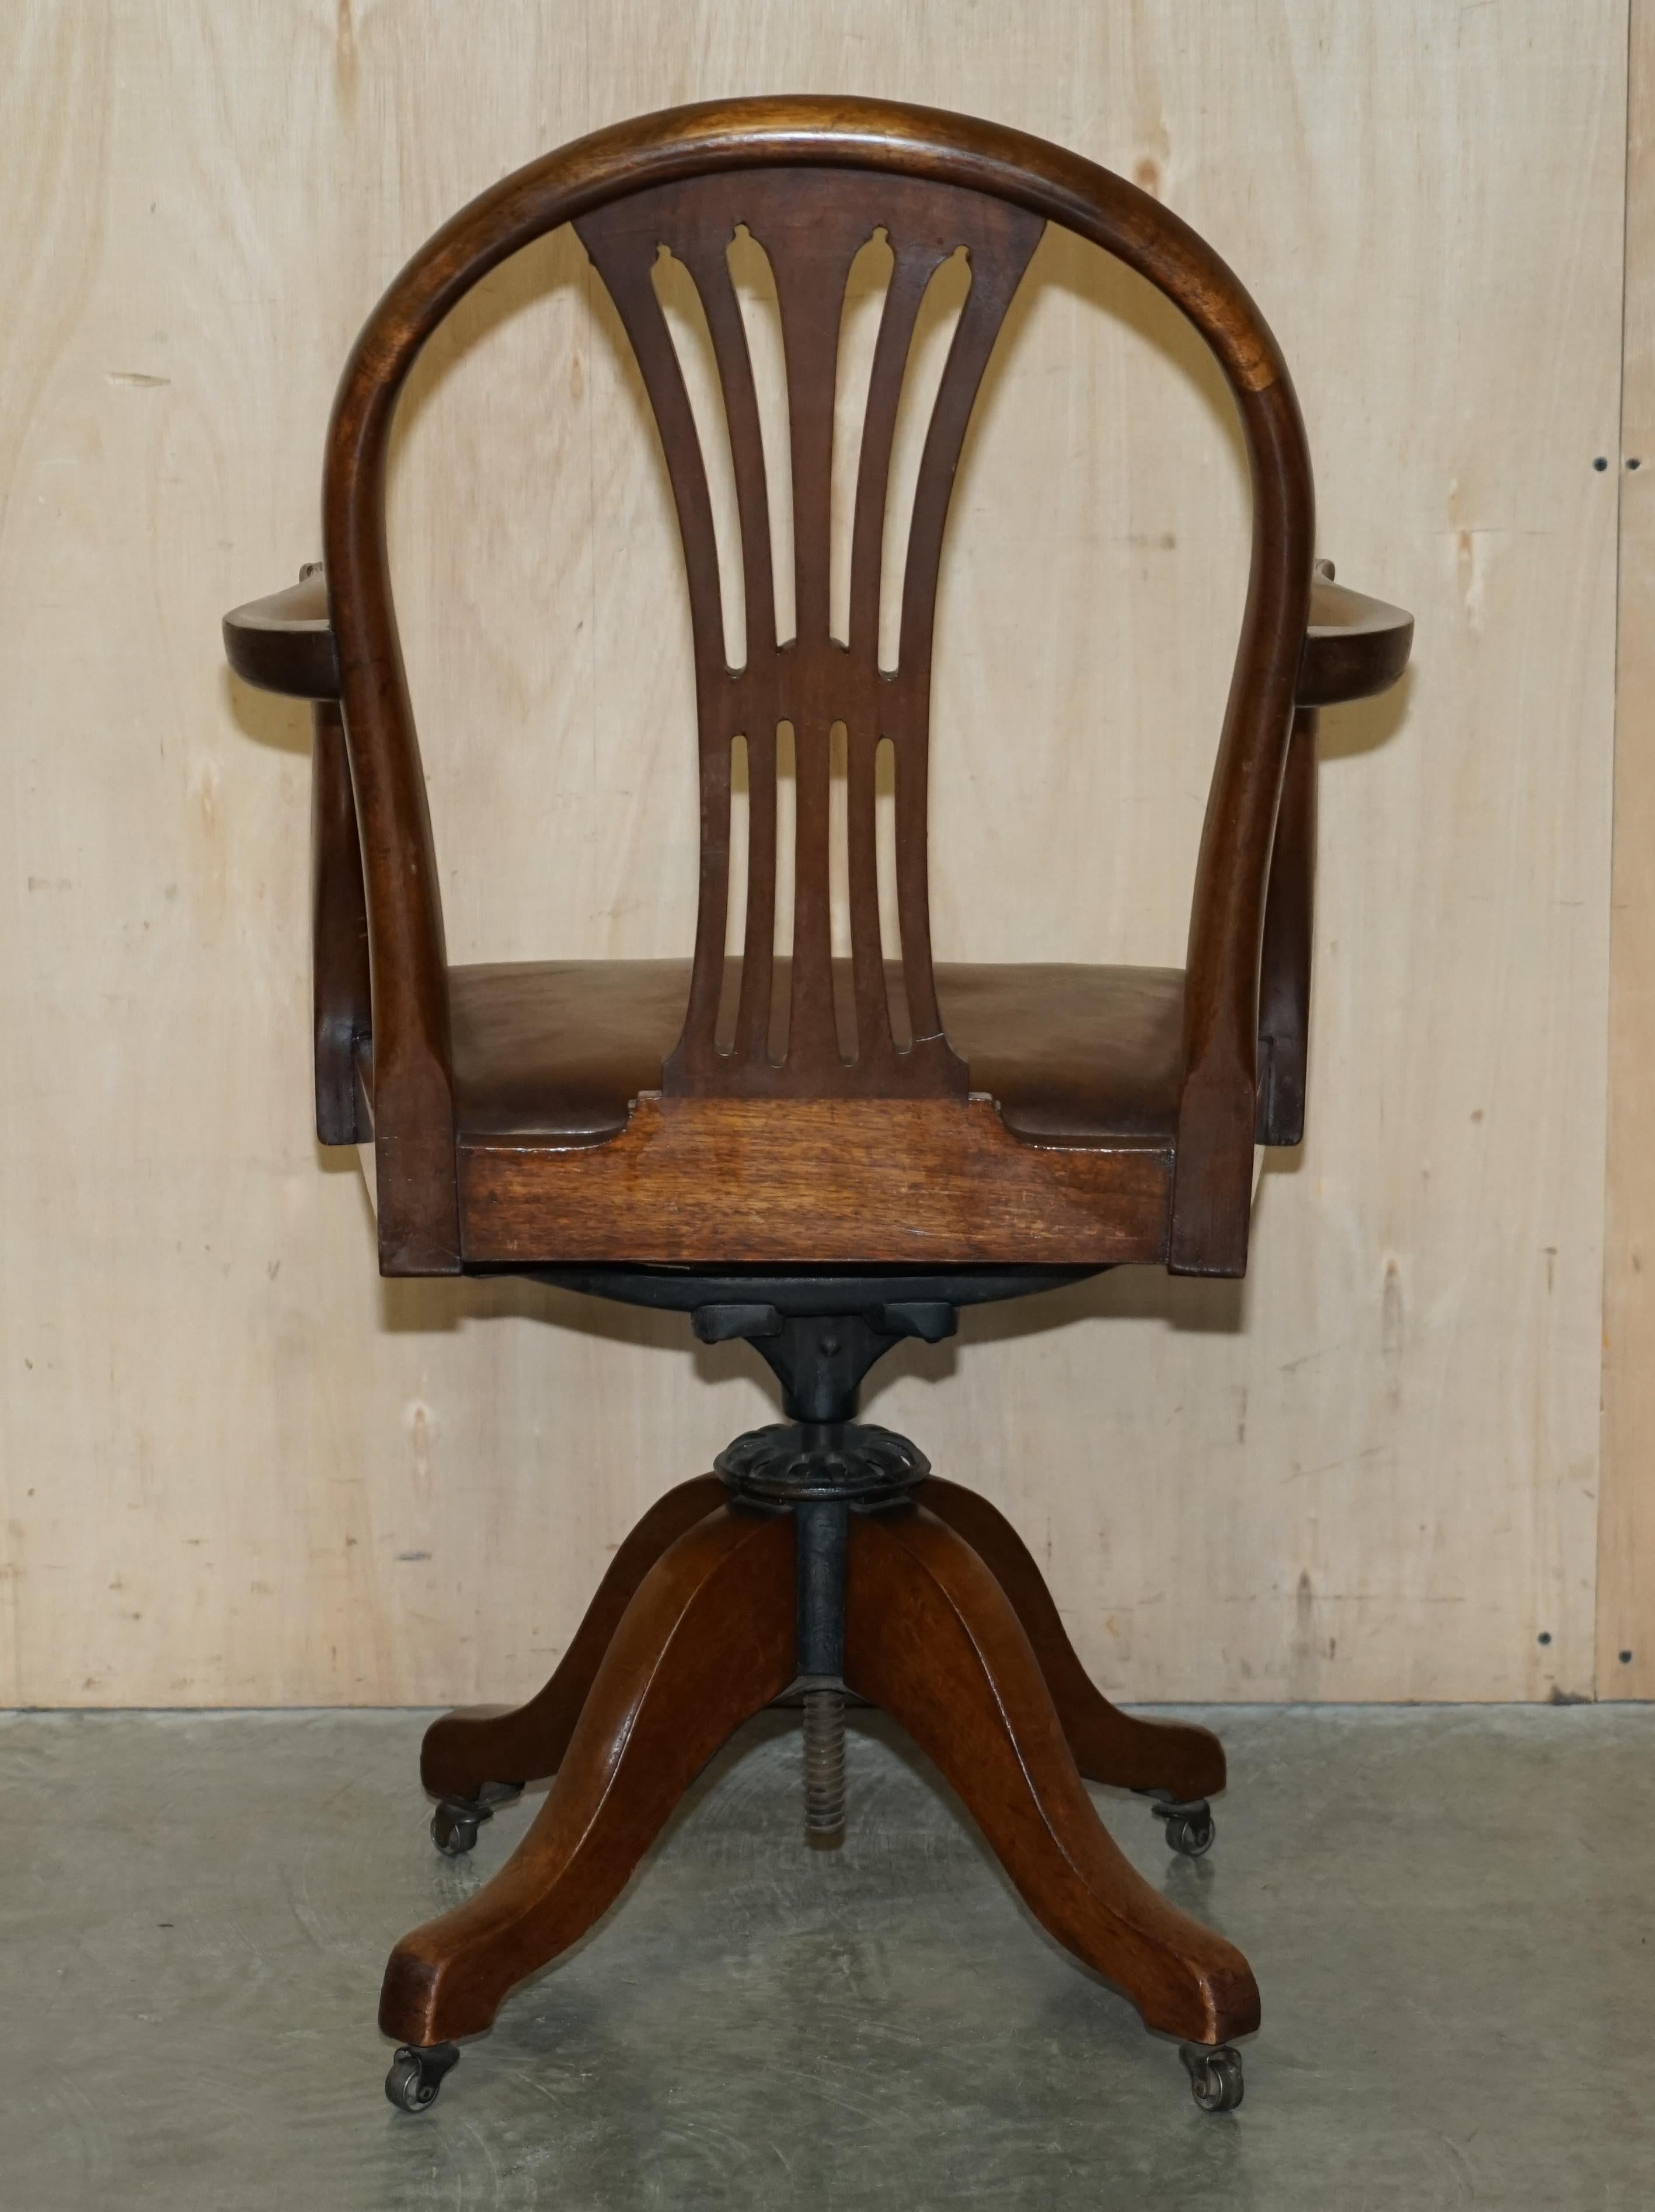 Unique Antique 1880 George Hepplewhite Wheatgrass Captains Chair Brown Leather For Sale 11